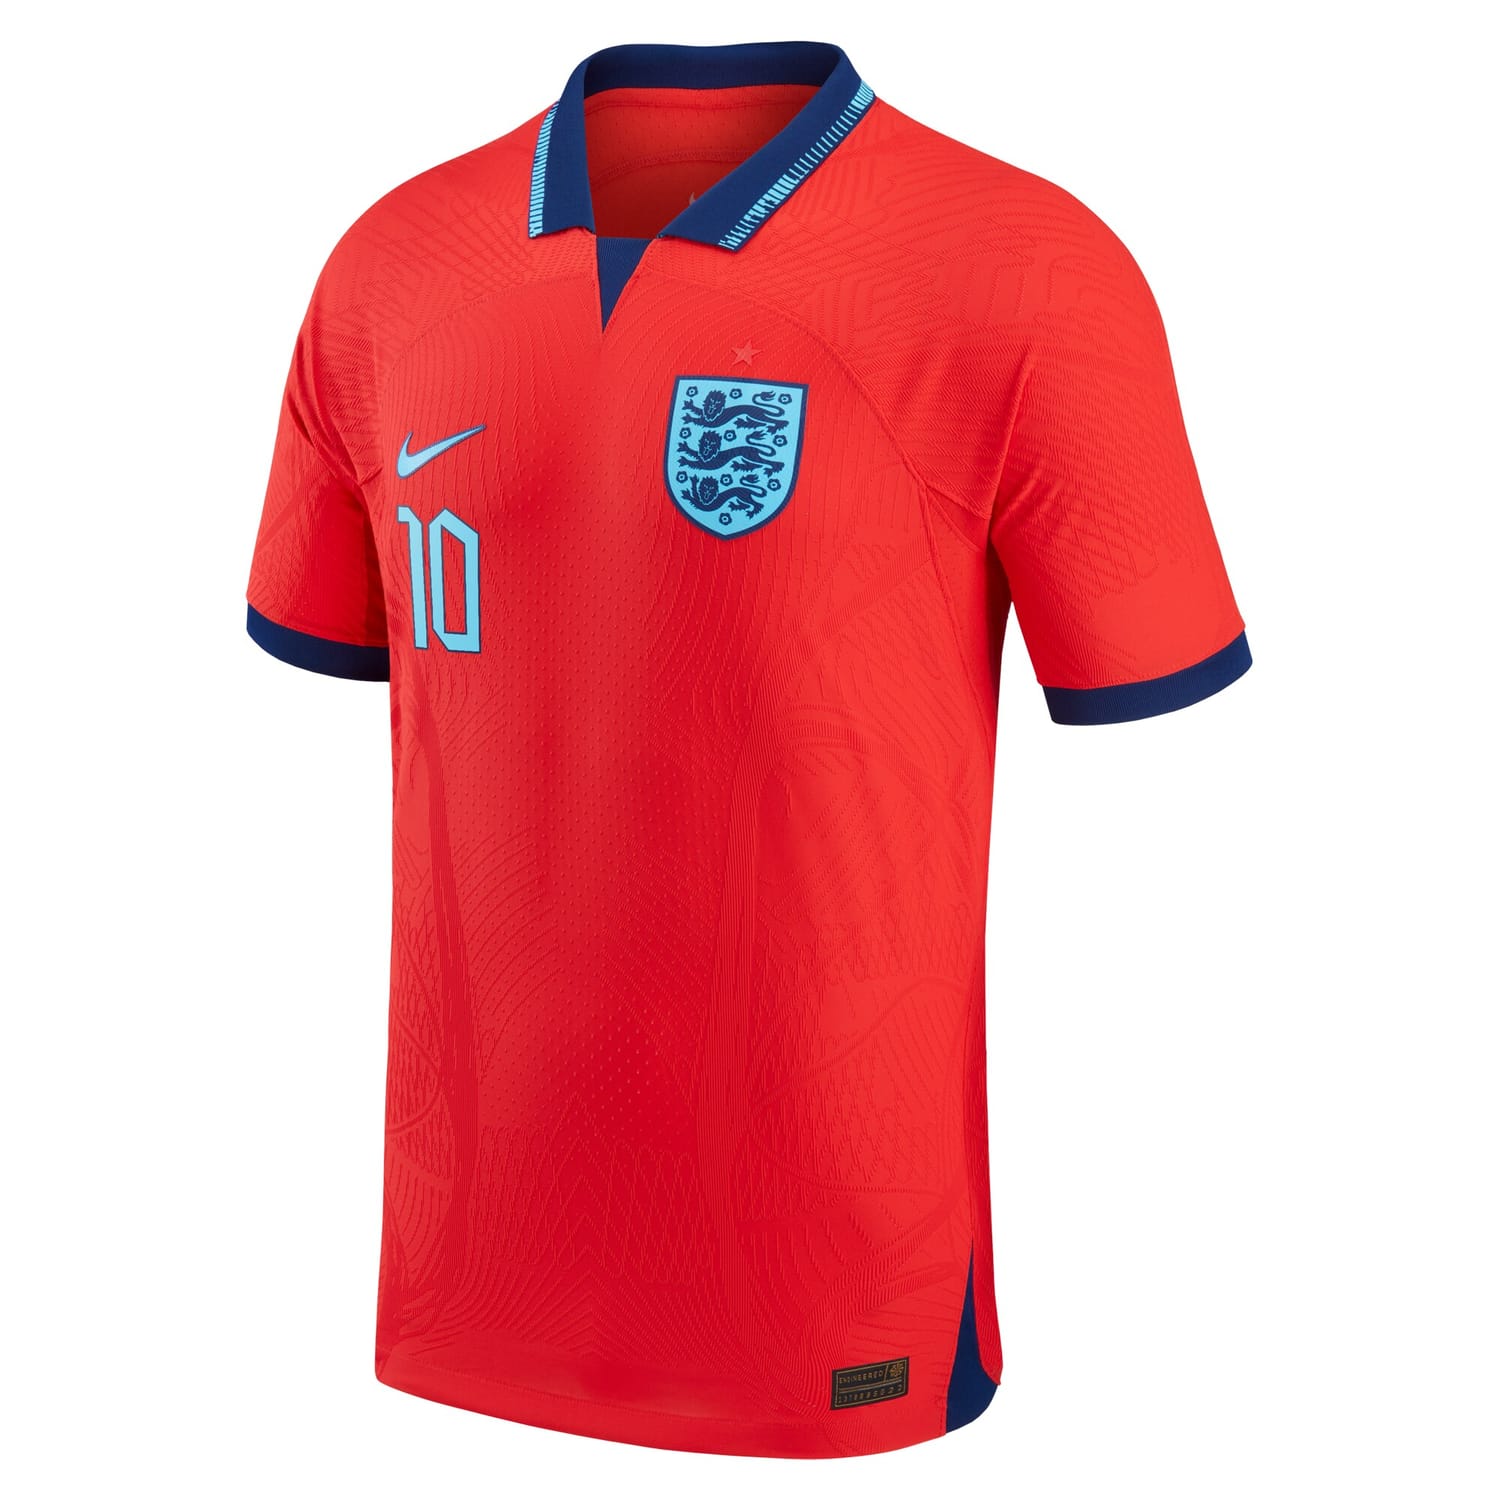 England National Team Away Authentic Jersey Shirt Red 2022-23 player Raheem Sterling printing for Men